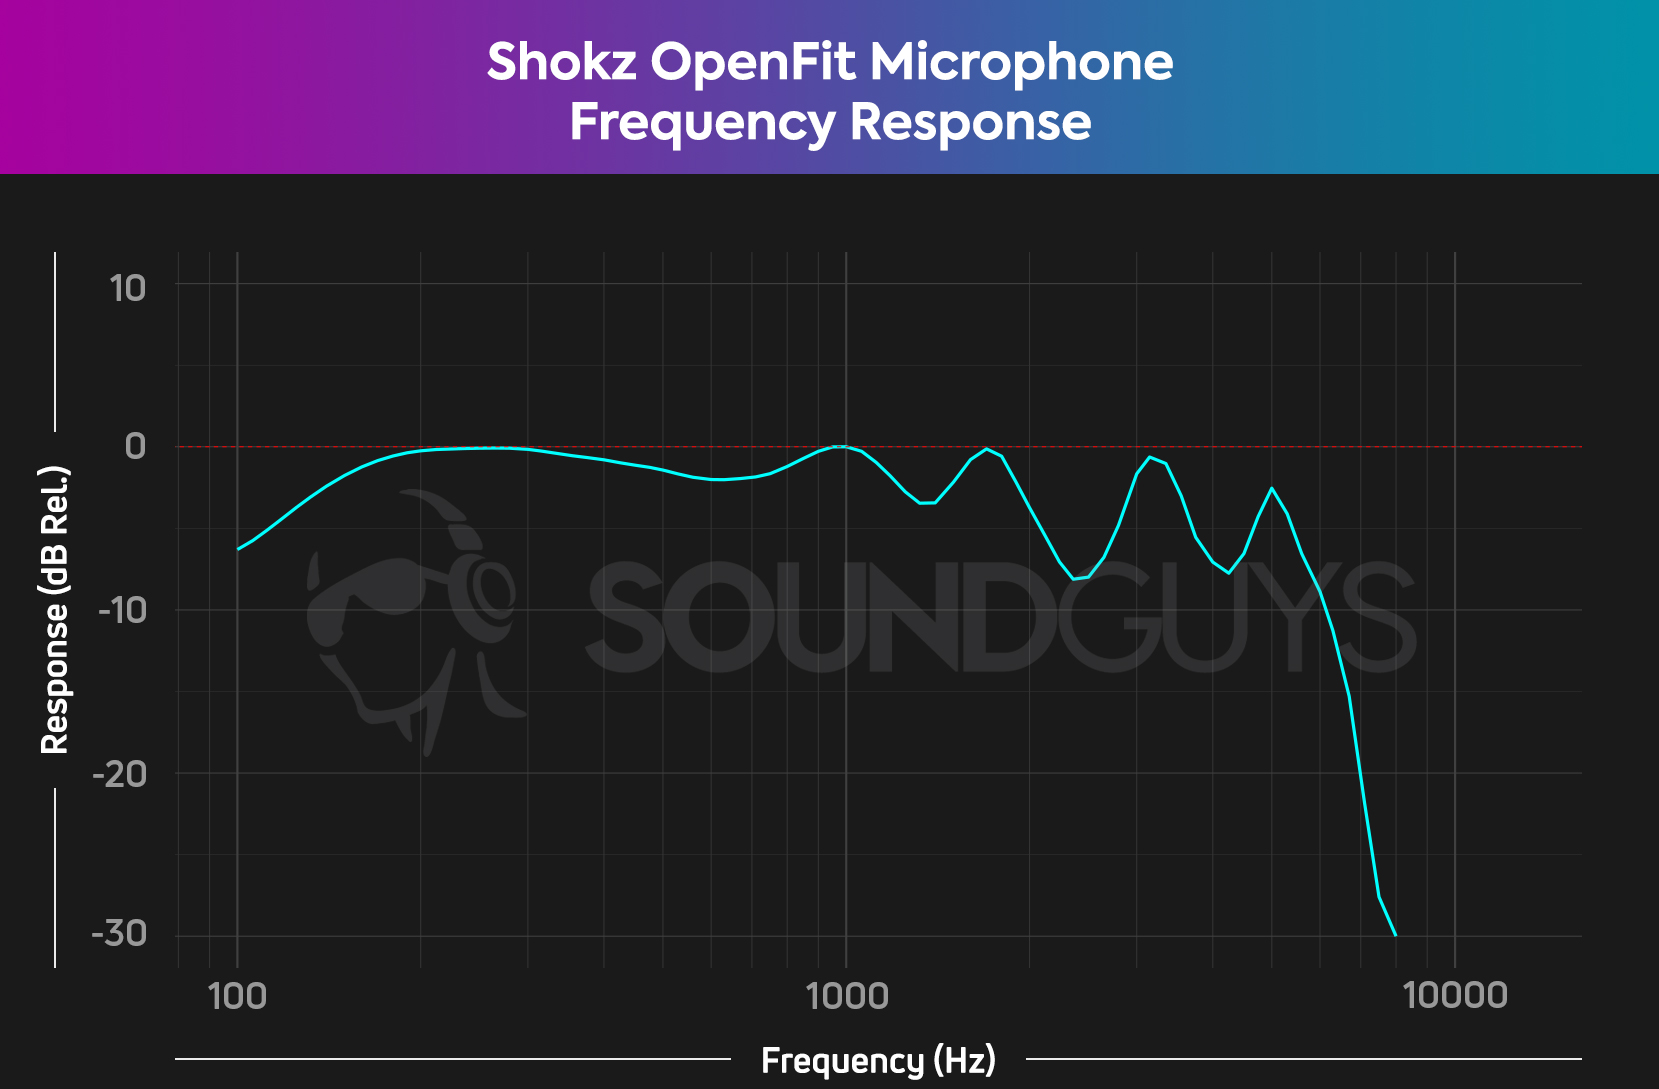 The microphone performance of the Shokz OpenFit plotted out in a chart.